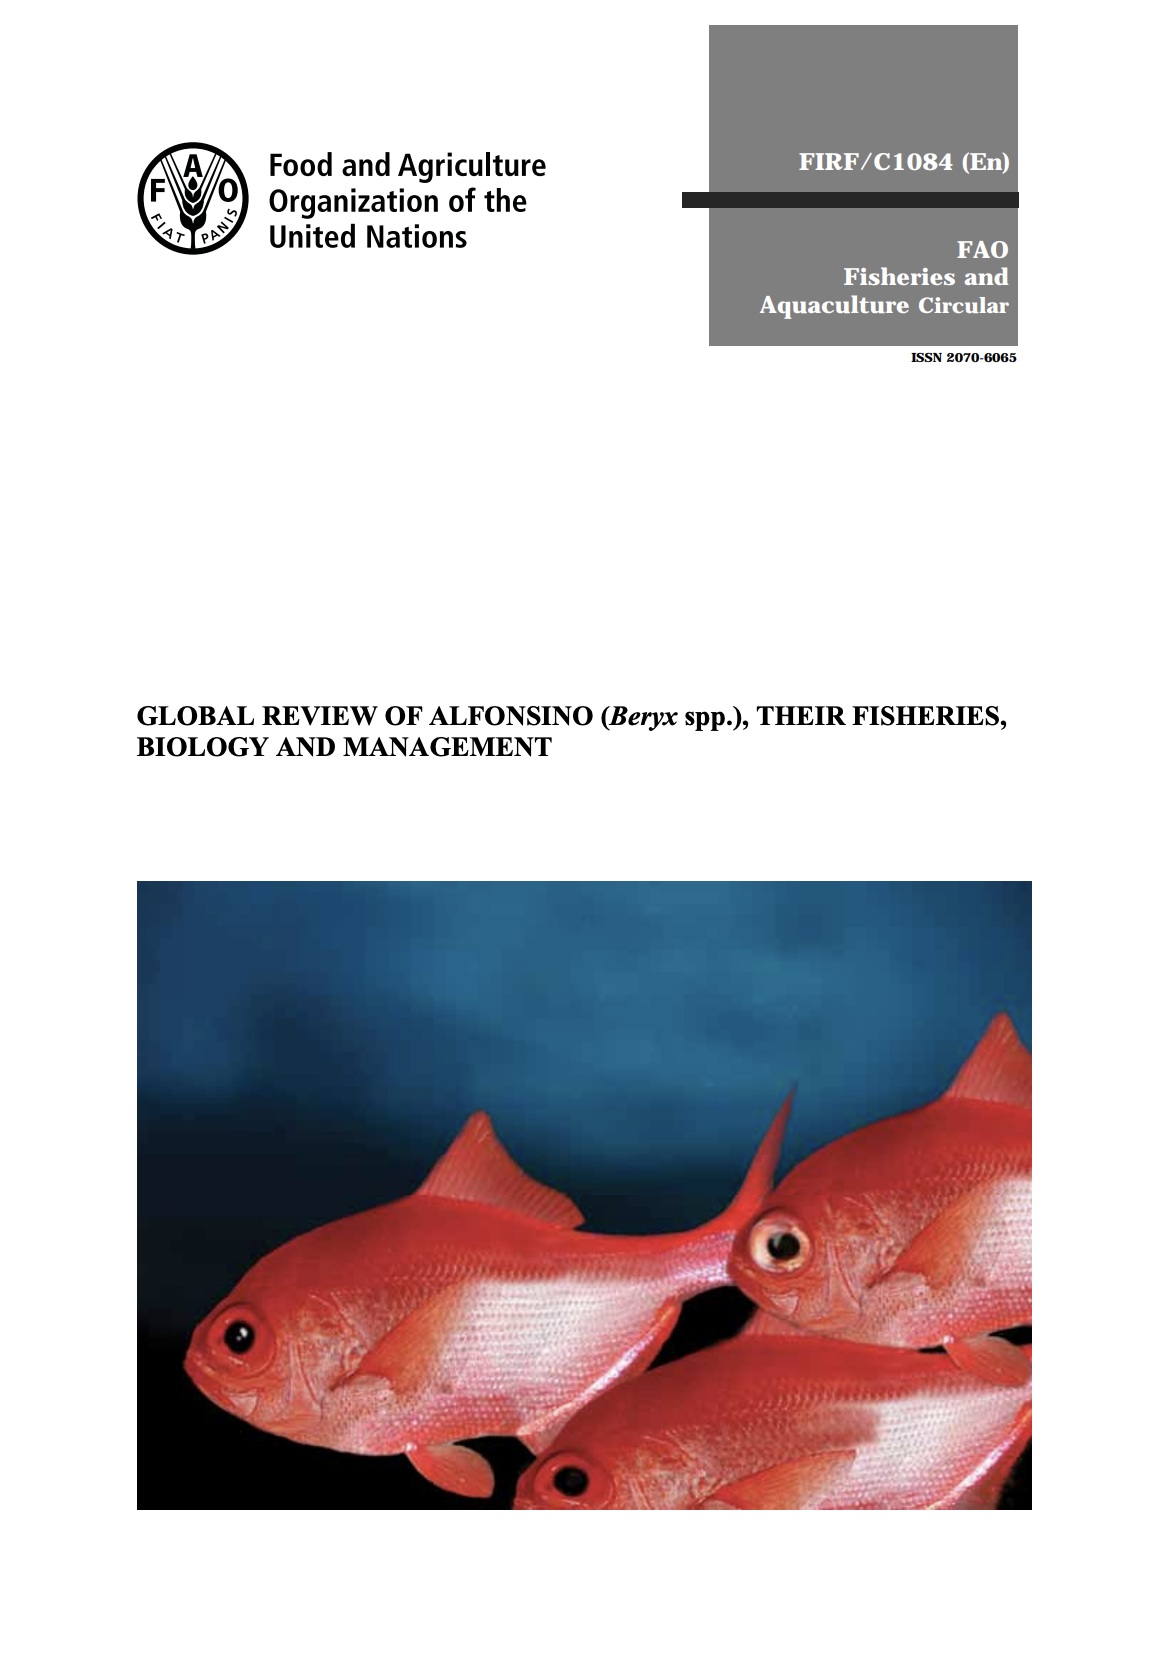 Global review of Alfonsino (Beryx spp.), their fisheries, biology and management